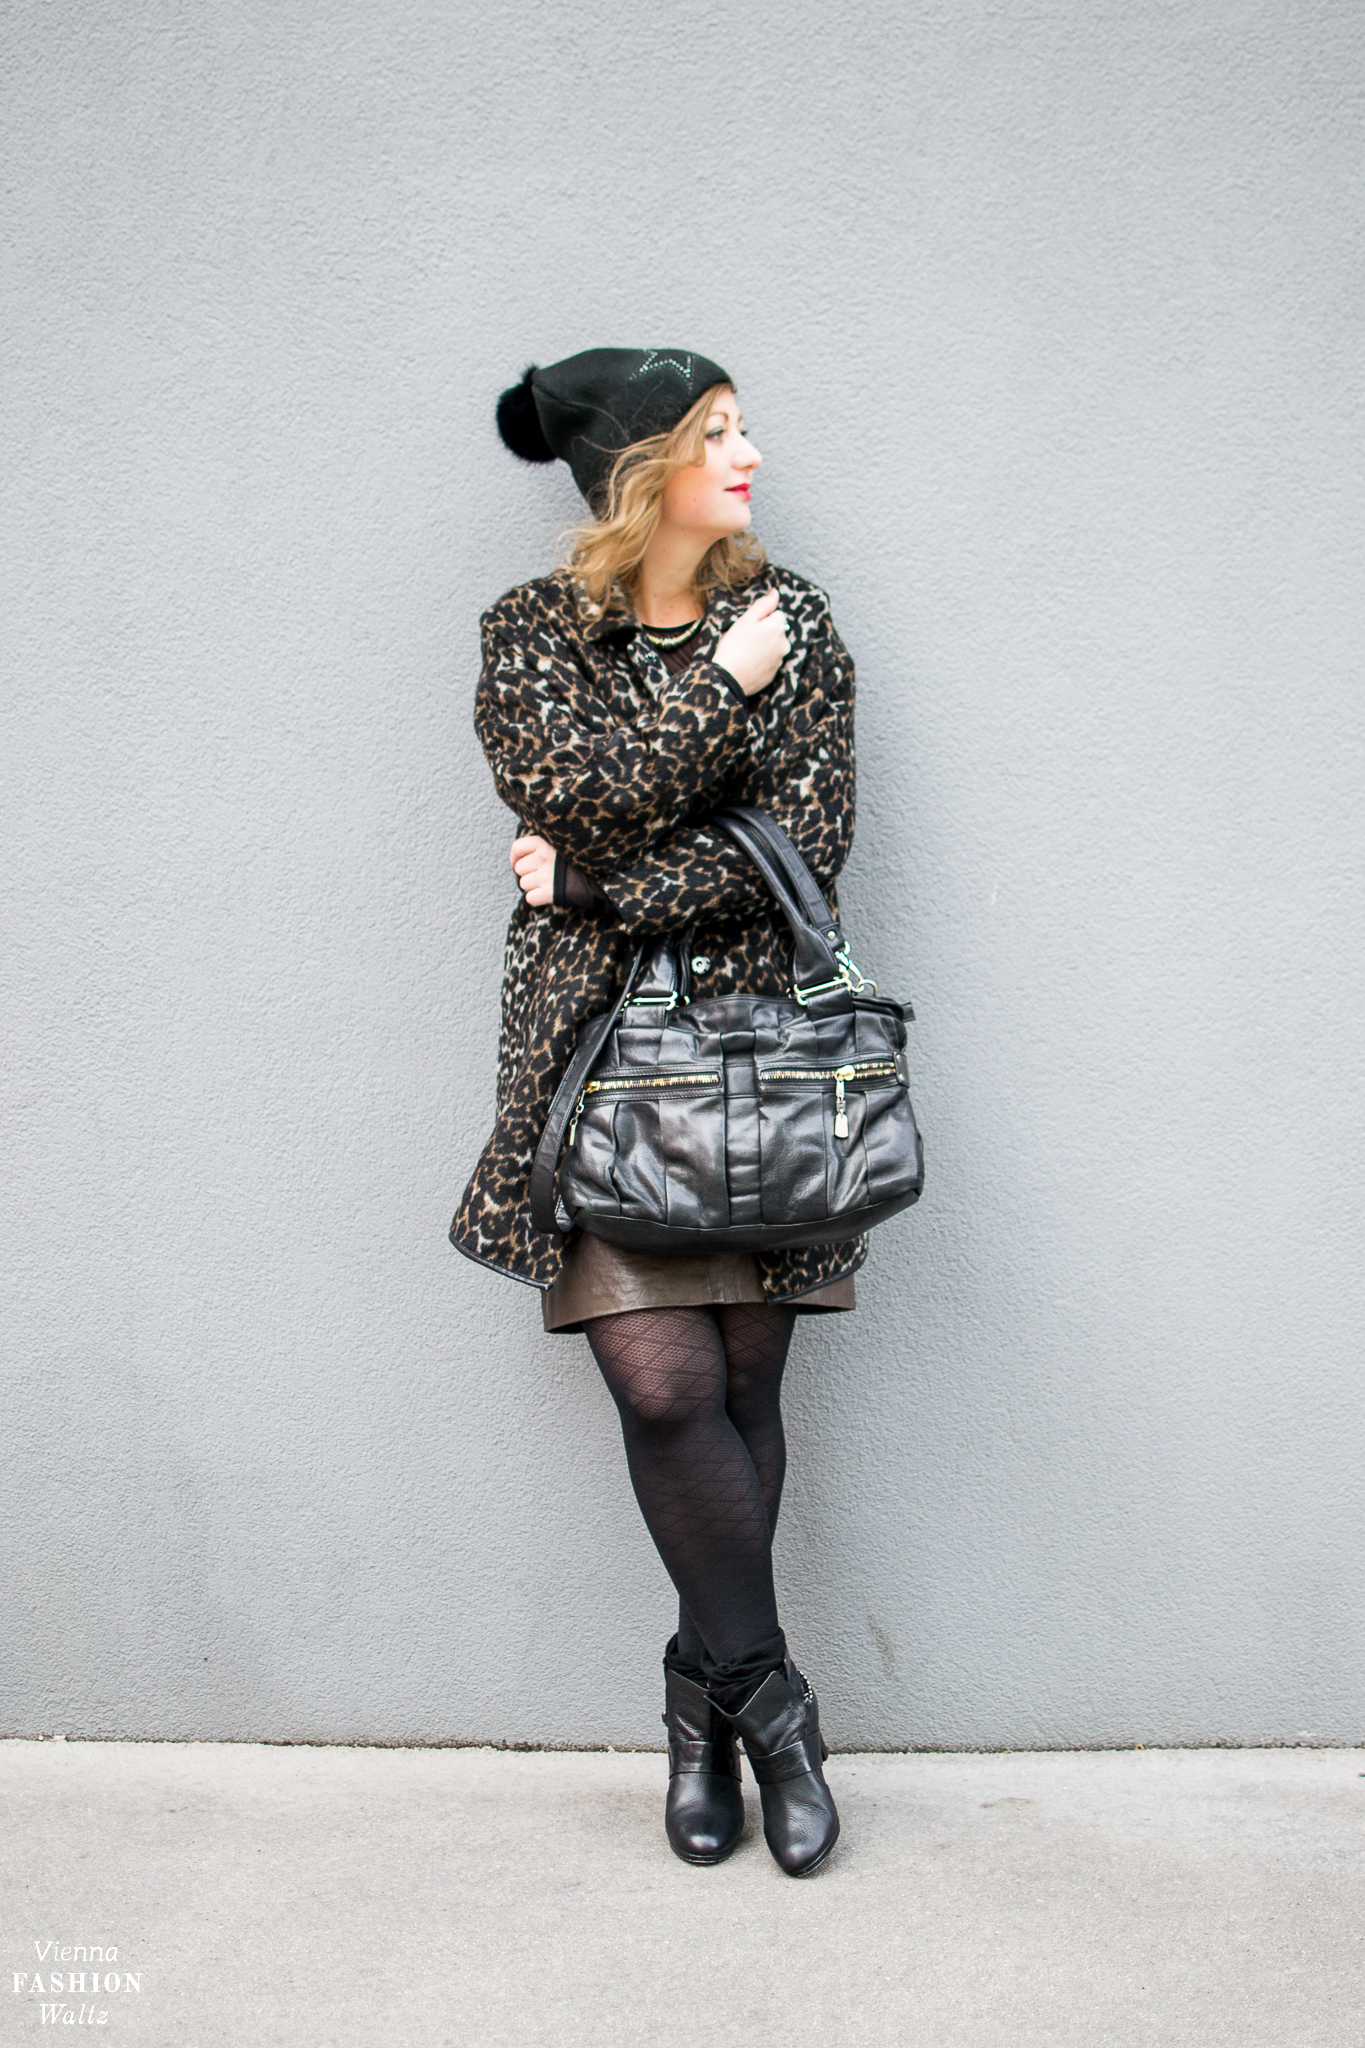 Fashion Trends | How to wear Leopard Print! Outfit with leopard print Coat and Leather Skirt